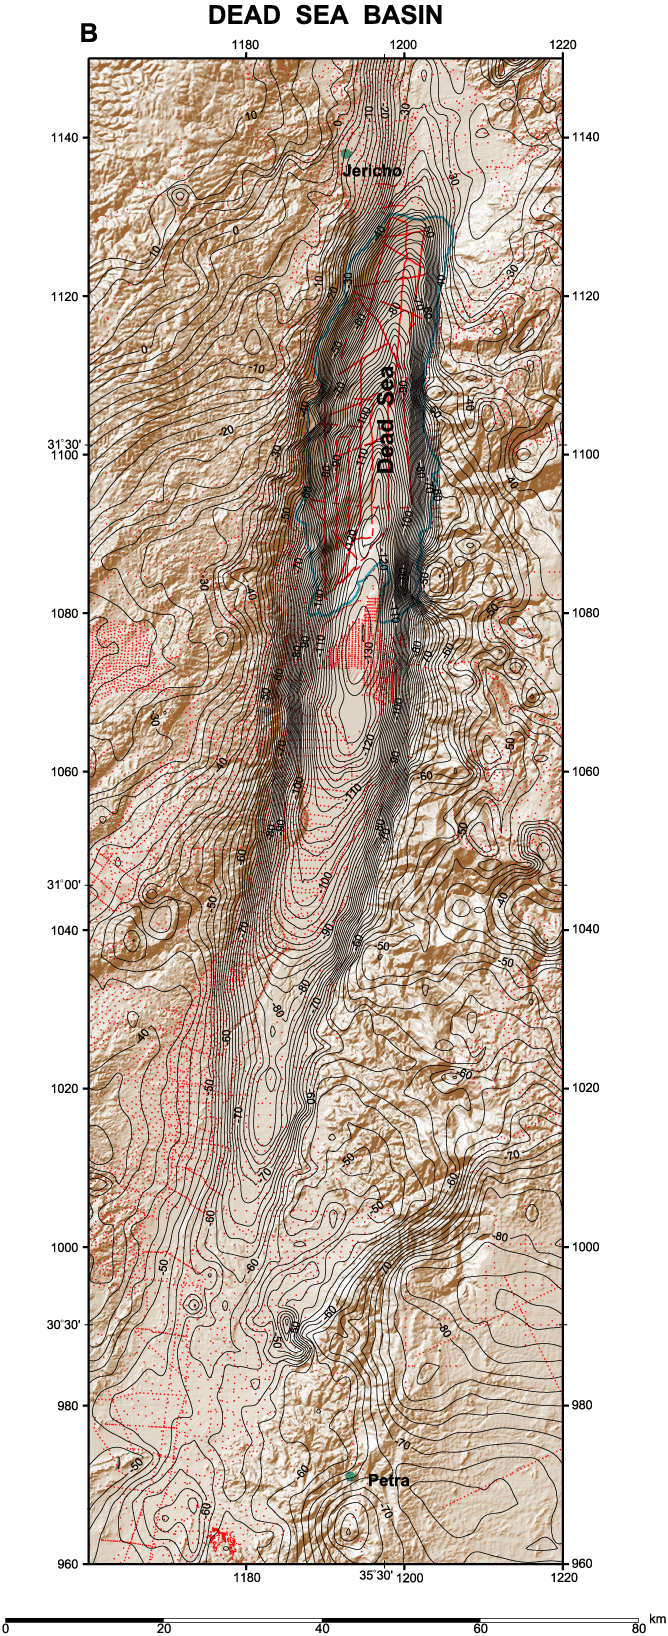 USGS Open-File Report 01-216, Bouguer Gravity Anomaly Map of the Dead Sea  Fault System, Image, Legend and Location Map